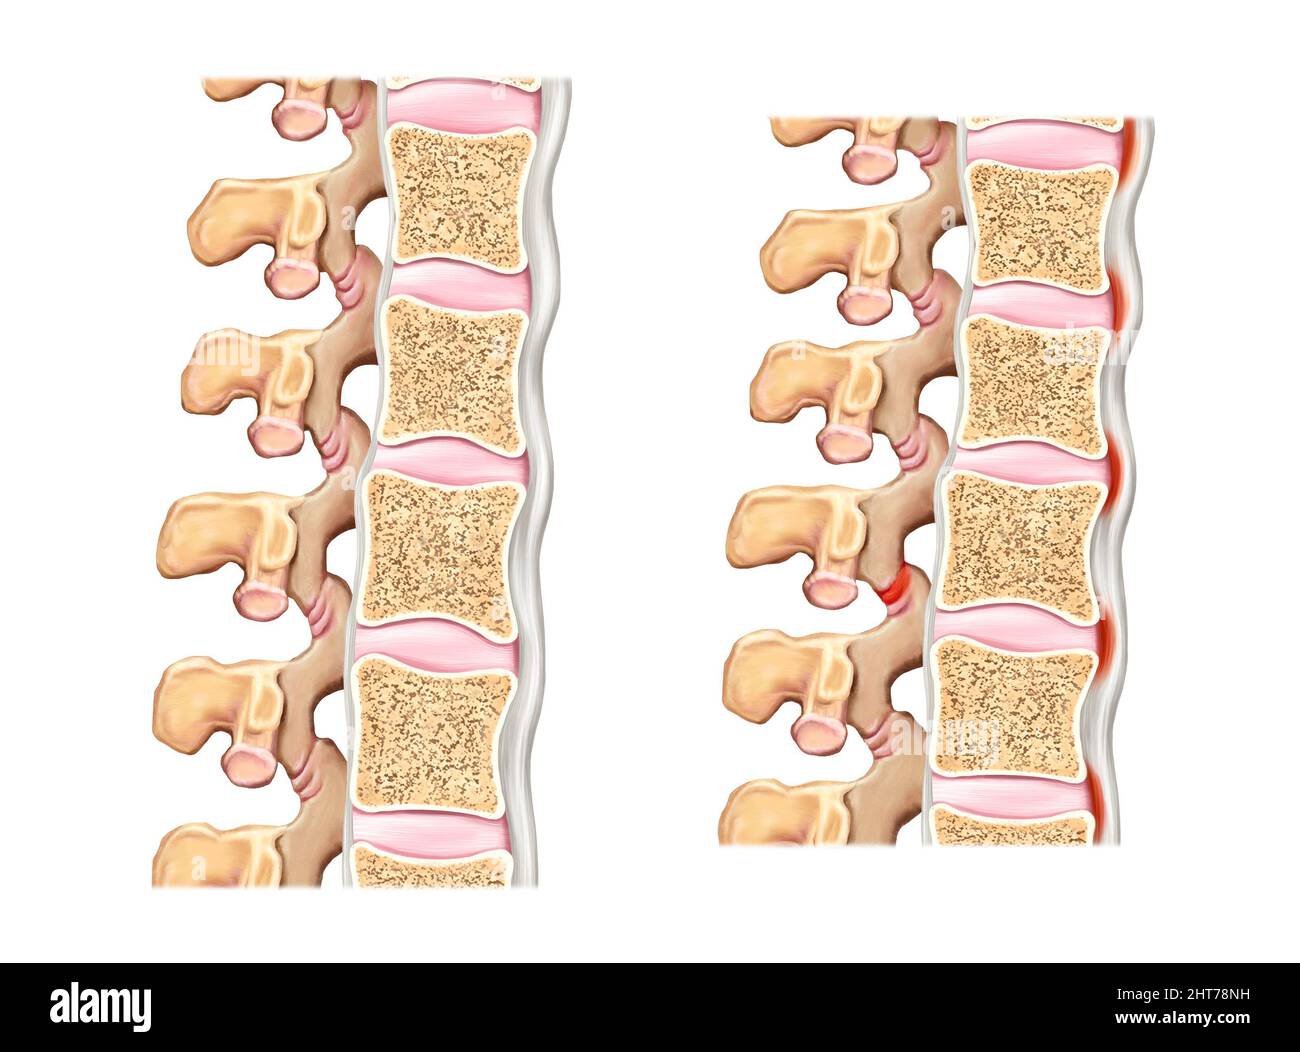 A realistic illustration of the spine and disc anatomy Stock Photo